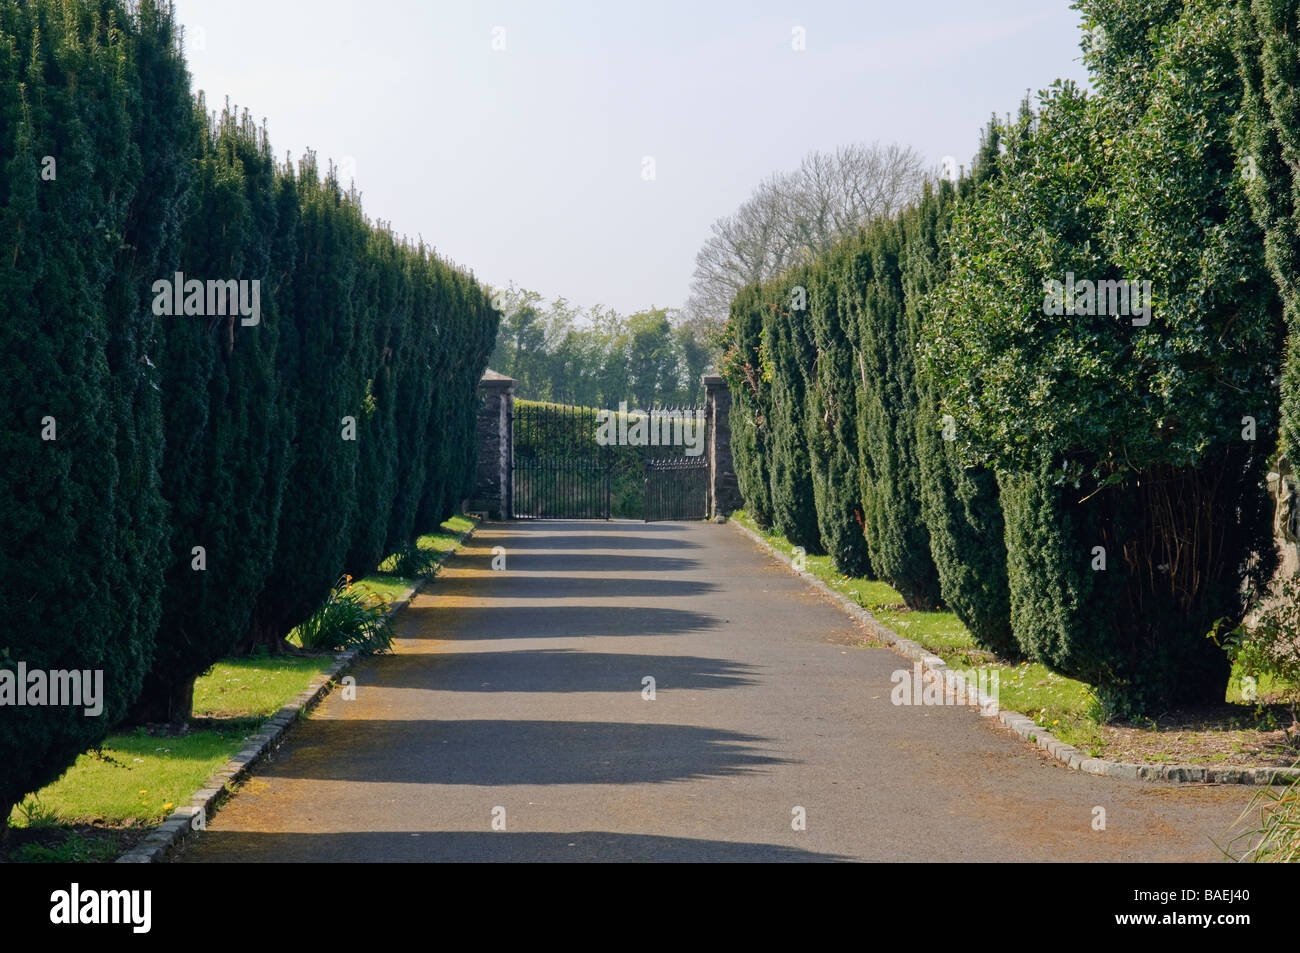 Yew-lined driveway at Saul Church, Portadown, built in 1932 on the site of St Patrick's first church in Ireland. Stock Photo